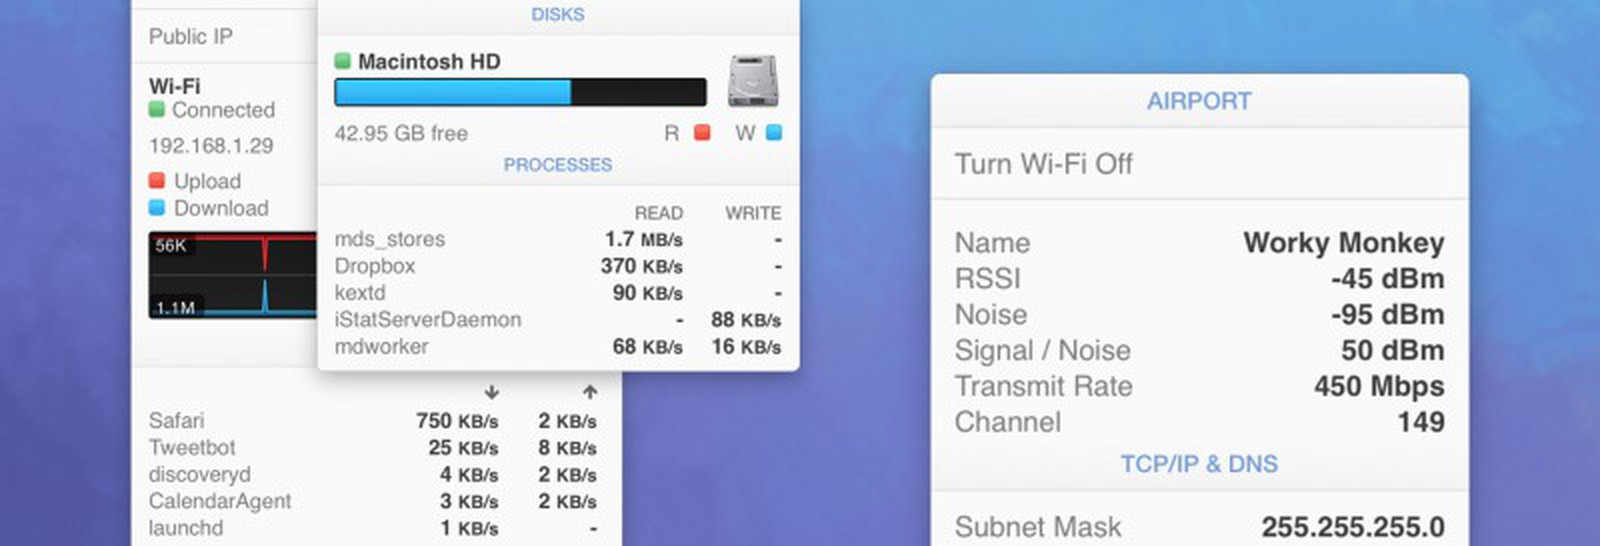 how to get rid of istat menus